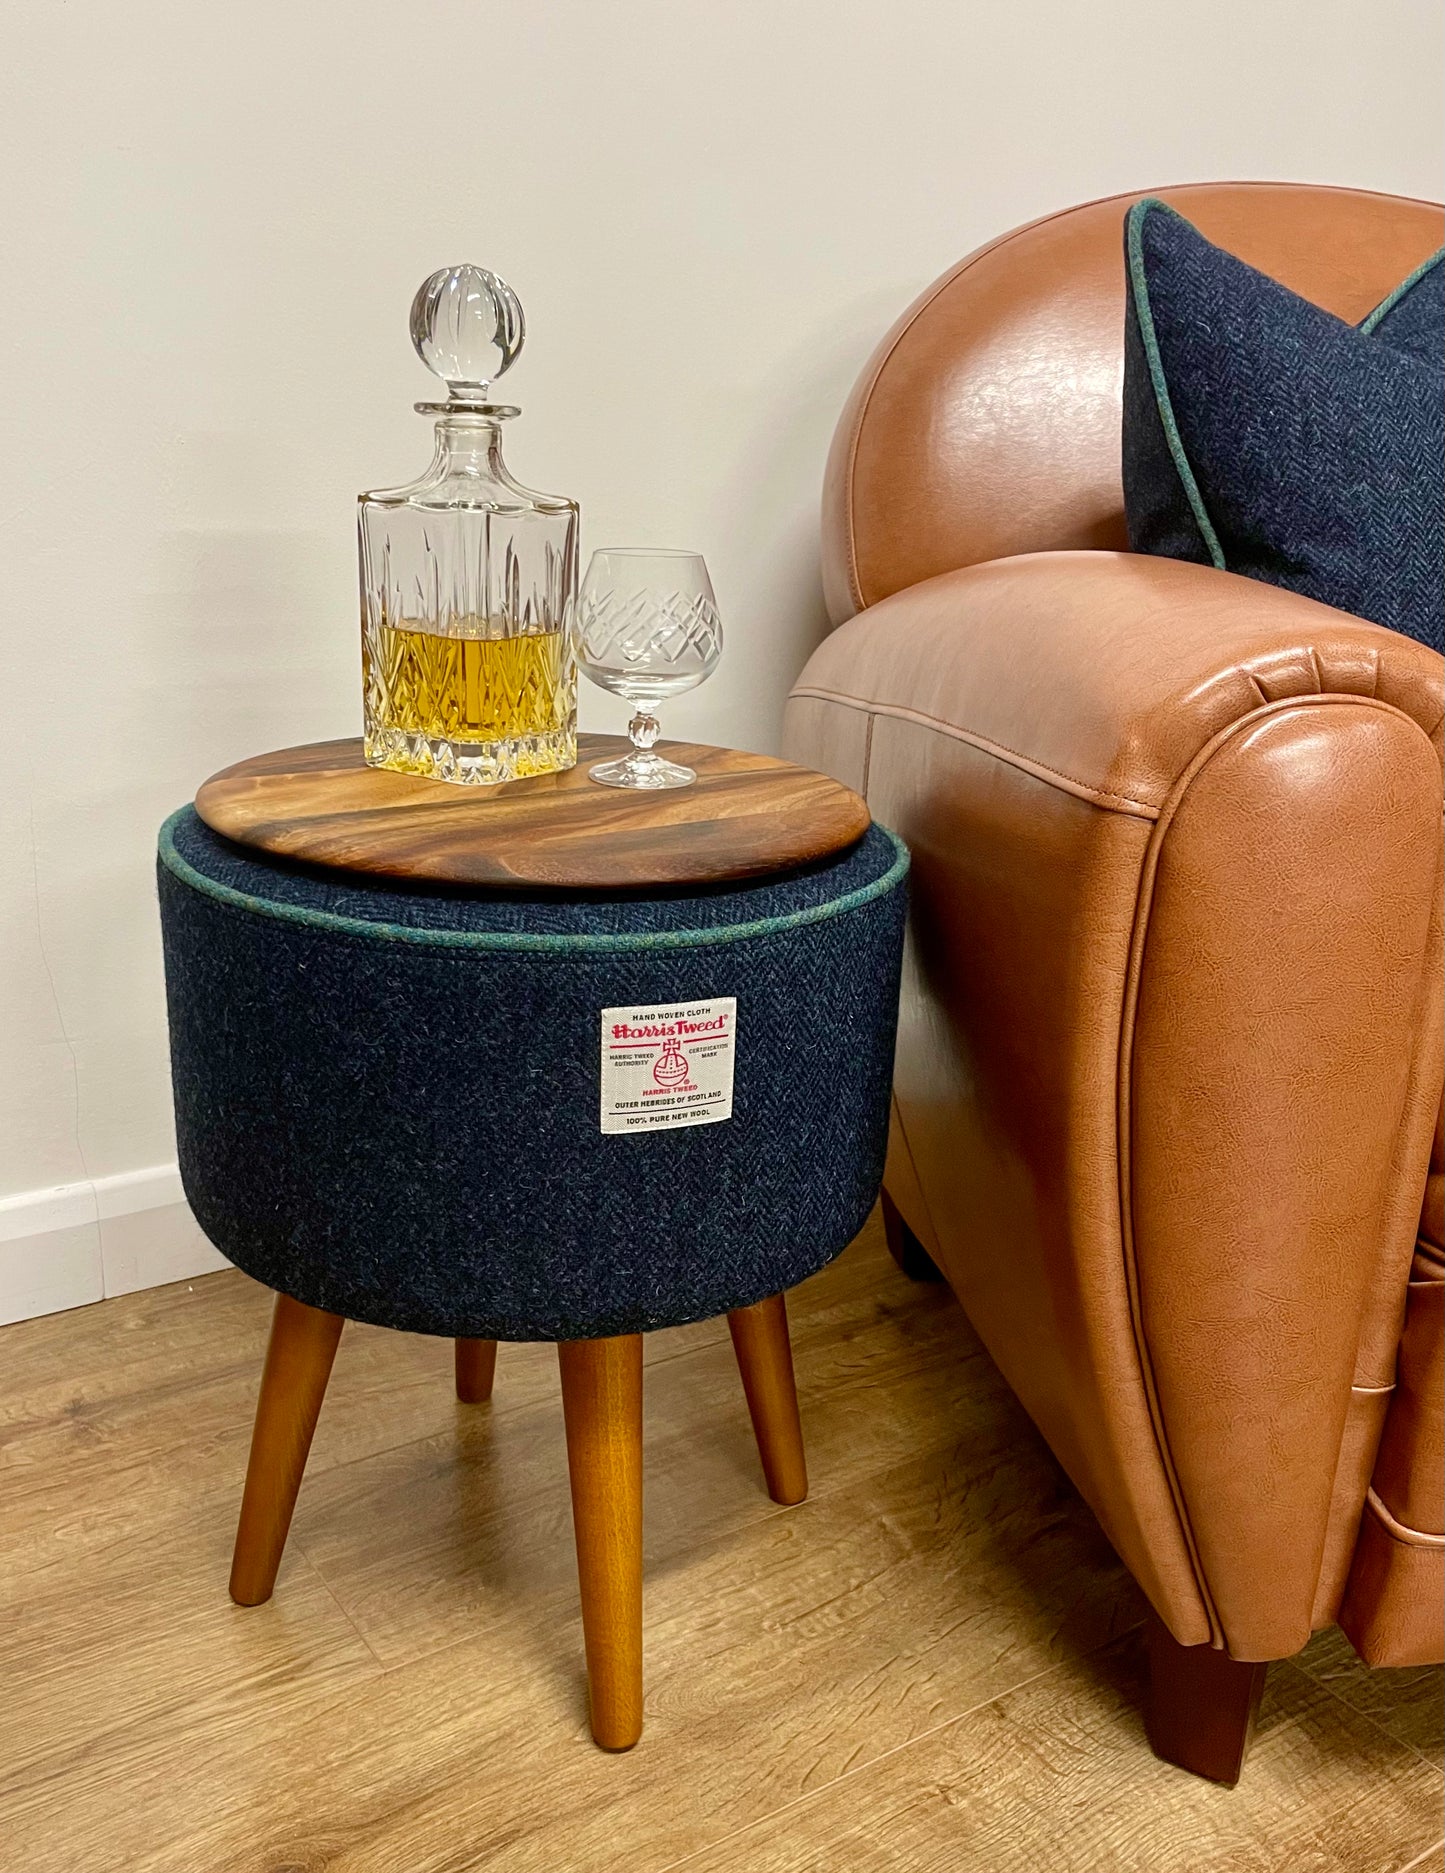 End Table, Navy Harris Tweed with Green Piping and Removable Wooden Top